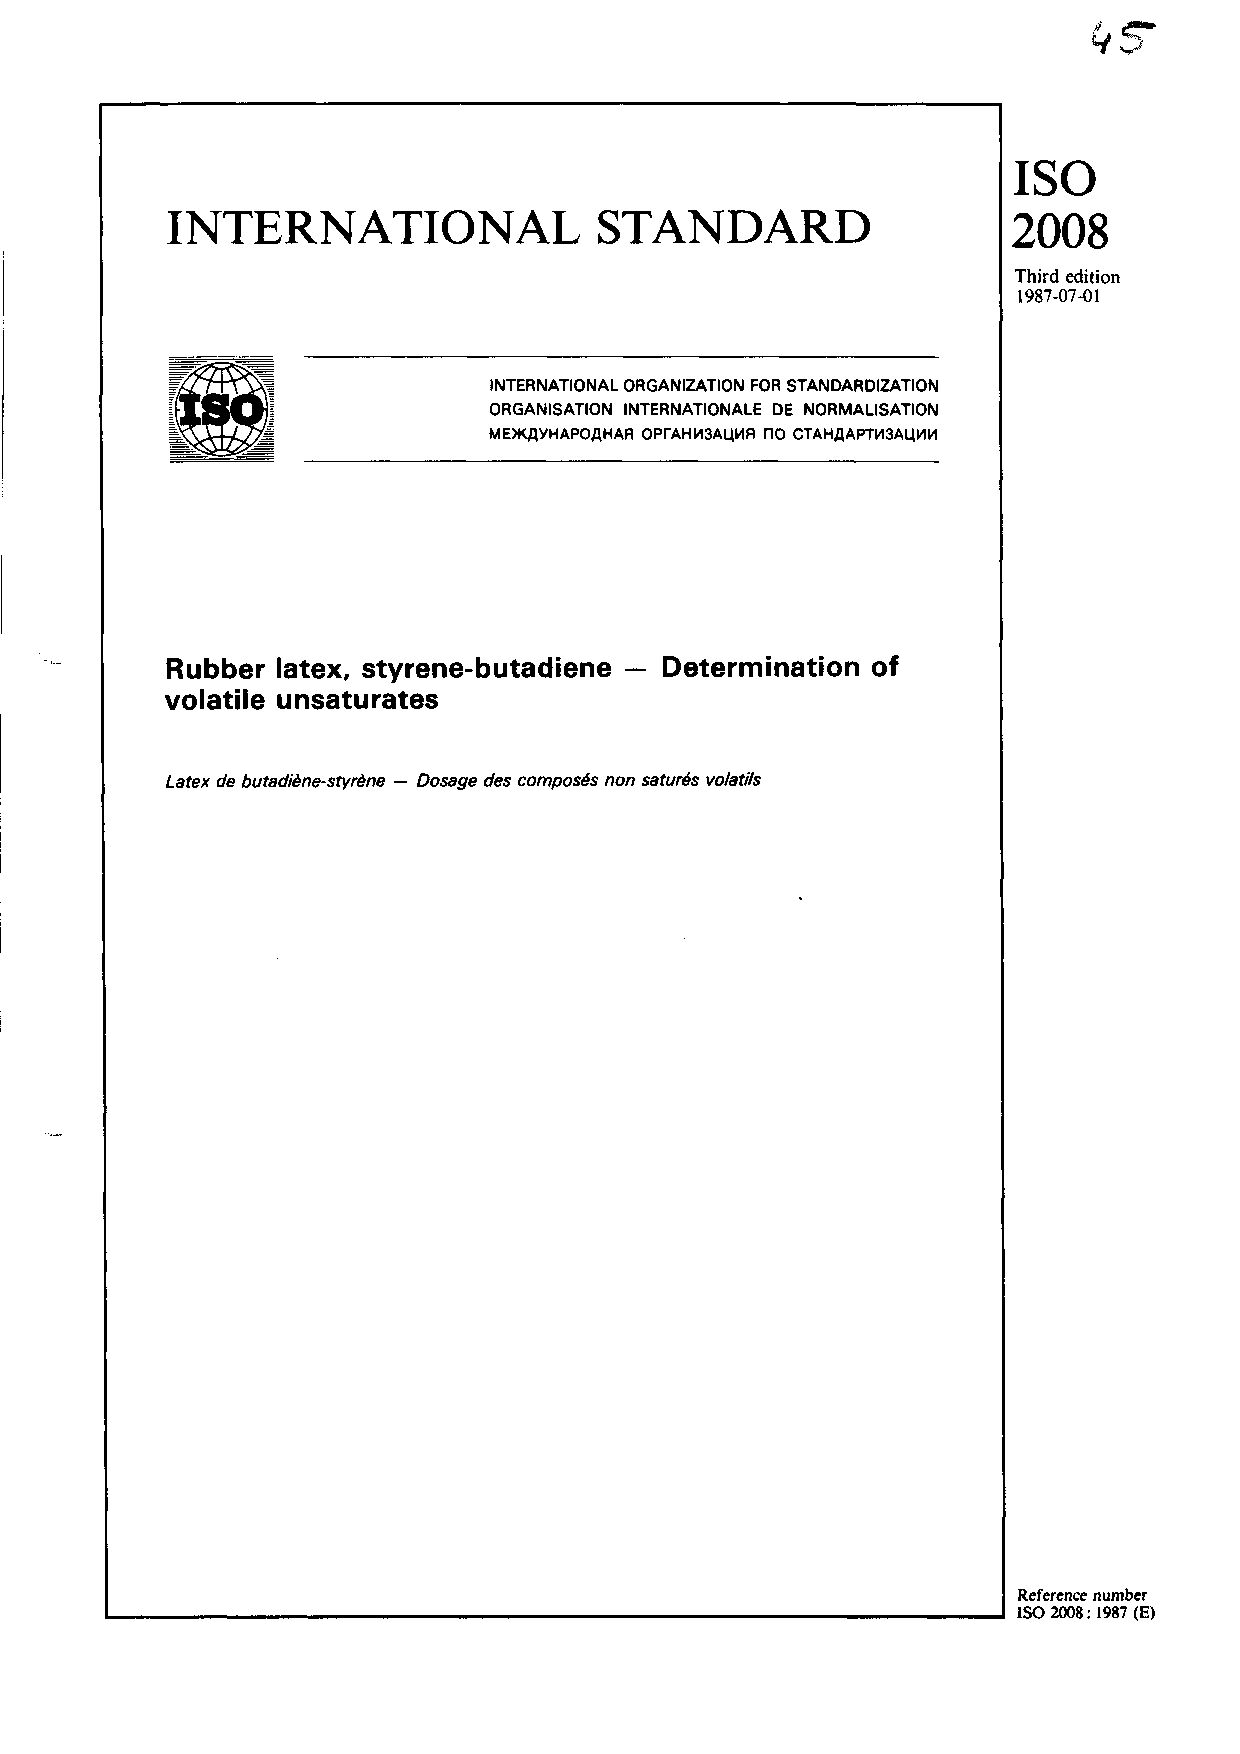 ISO 2008-1987